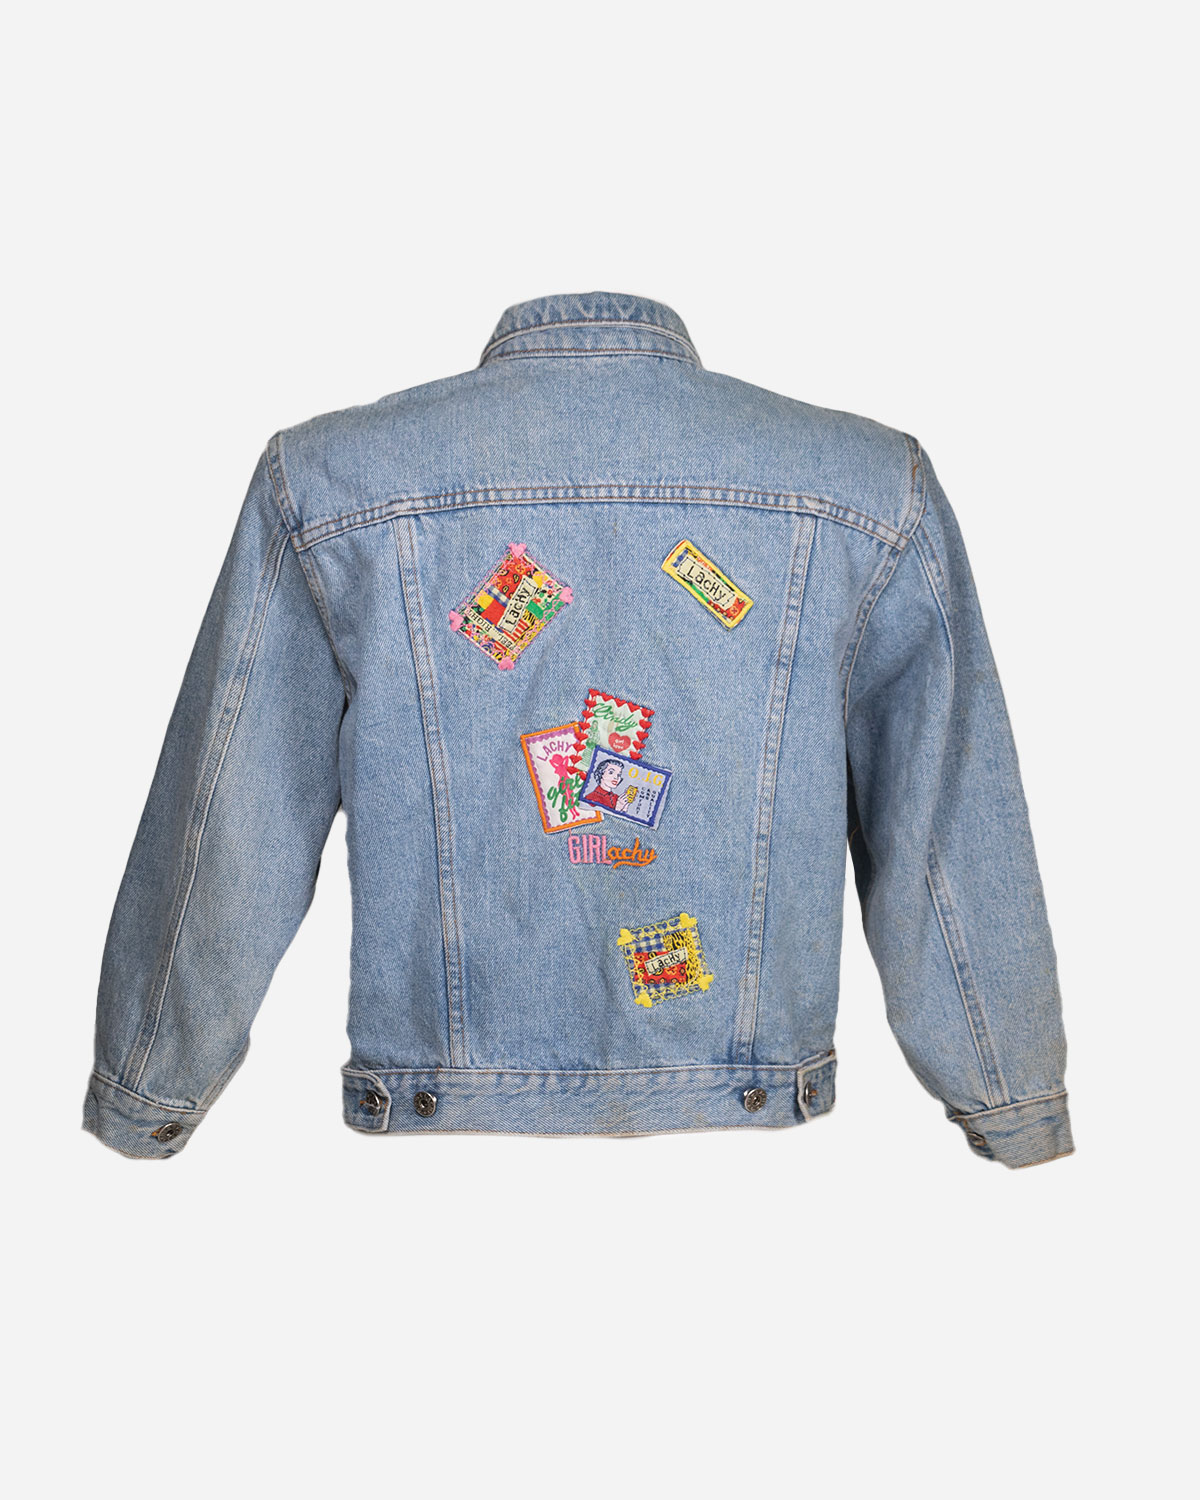 Box four denim jackets with patches